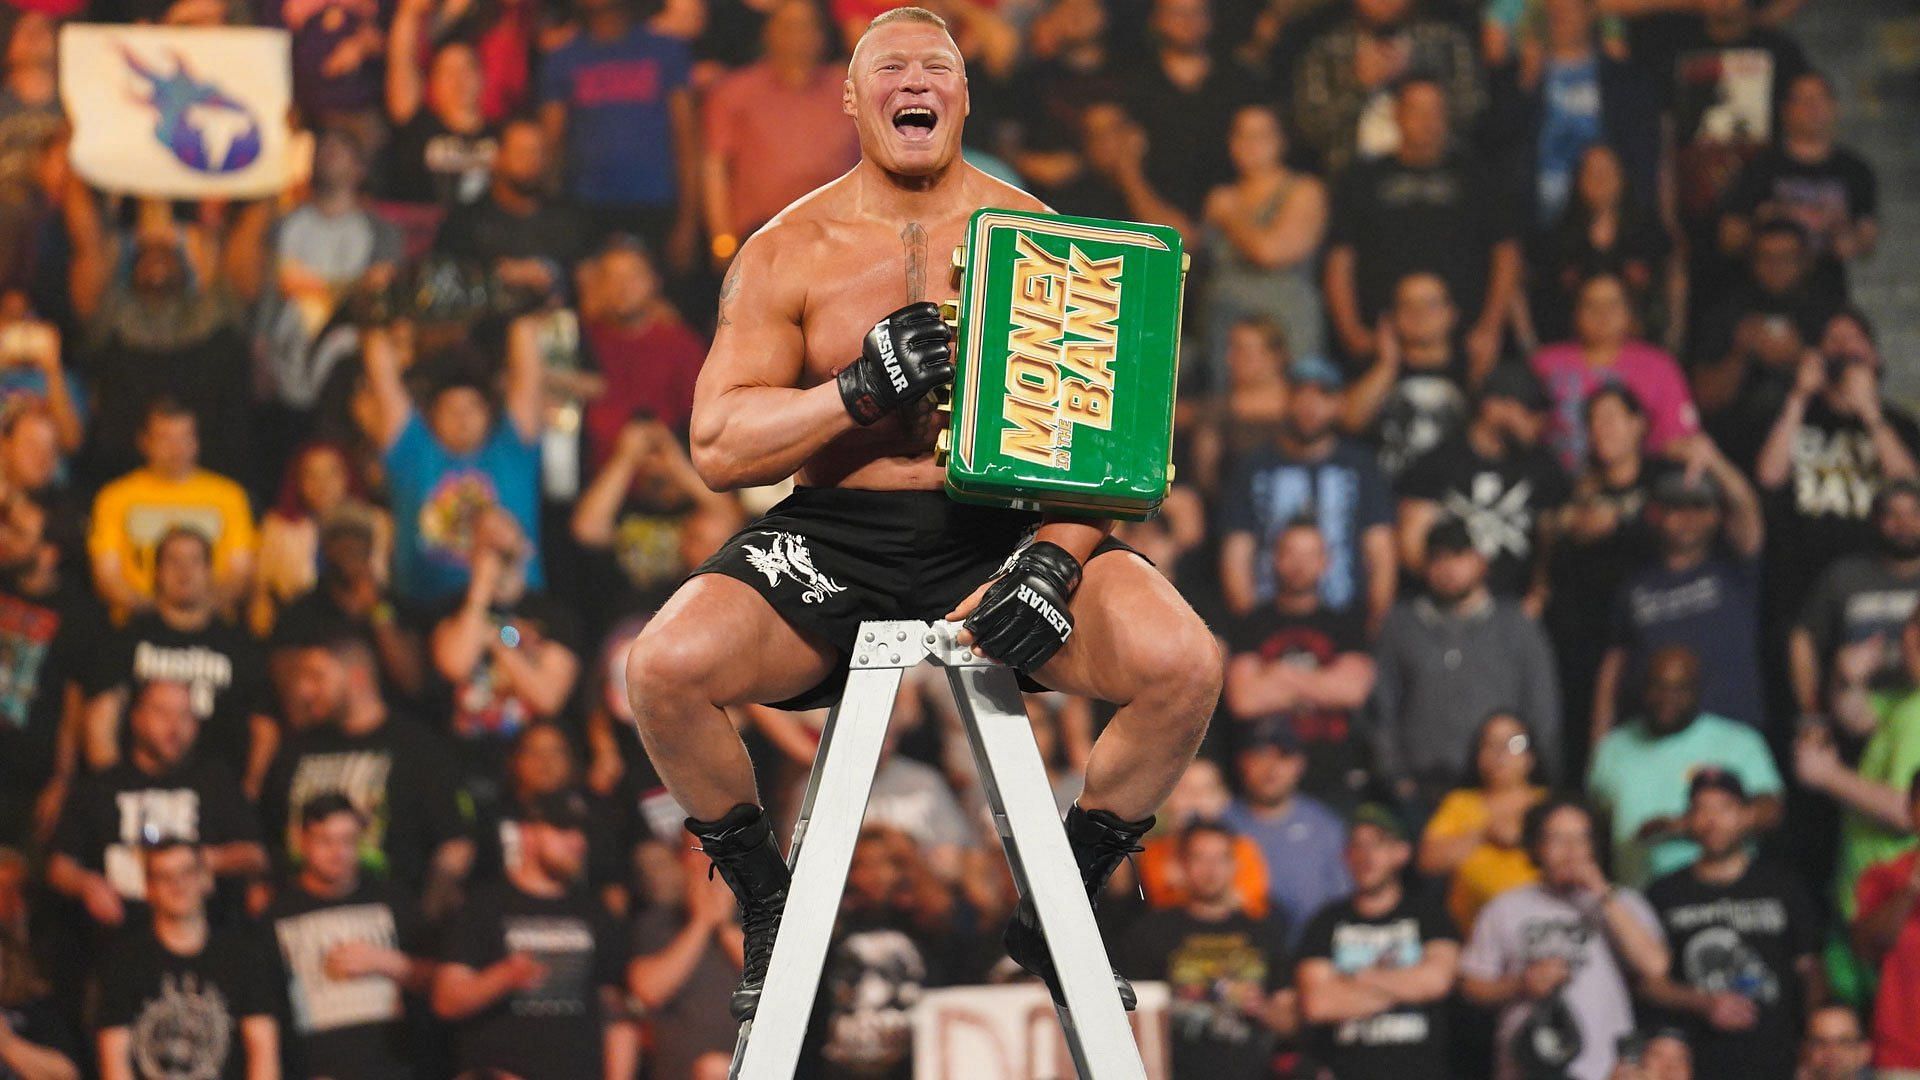 Brock Lesnar wins The Money in the Bank, 2019